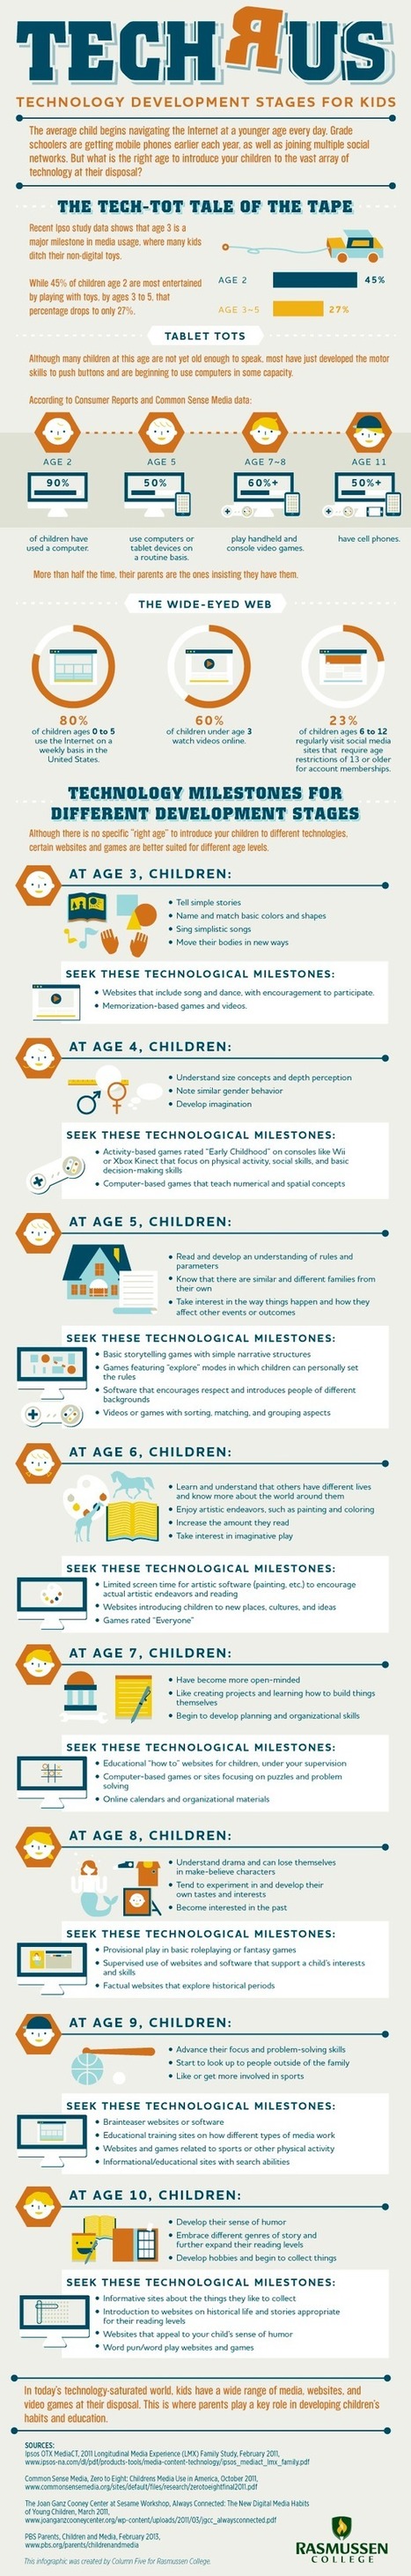 Educational Technology Development Stages for Kids Infographic | e-Learning Infographics | The 21st Century | Scoop.it